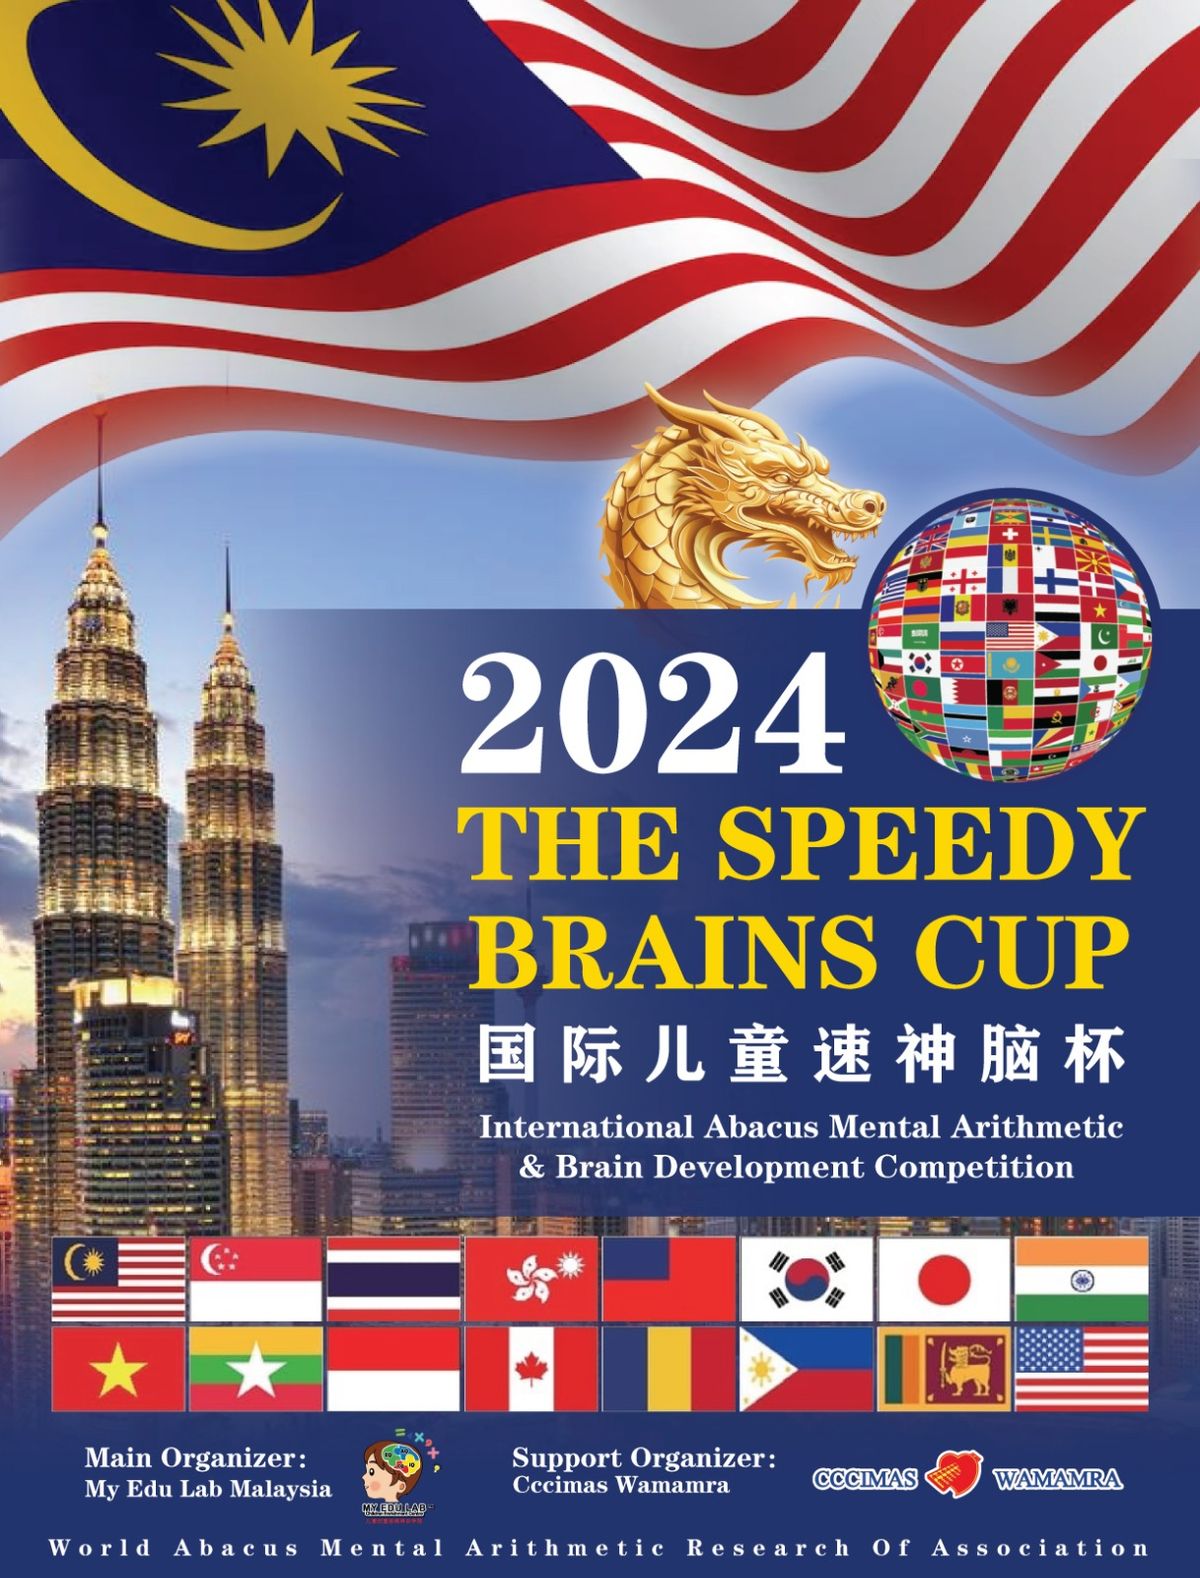 The Speedy Brains Cup 2024 - International Abacus Mental Arithmetic & Brain Development Competition